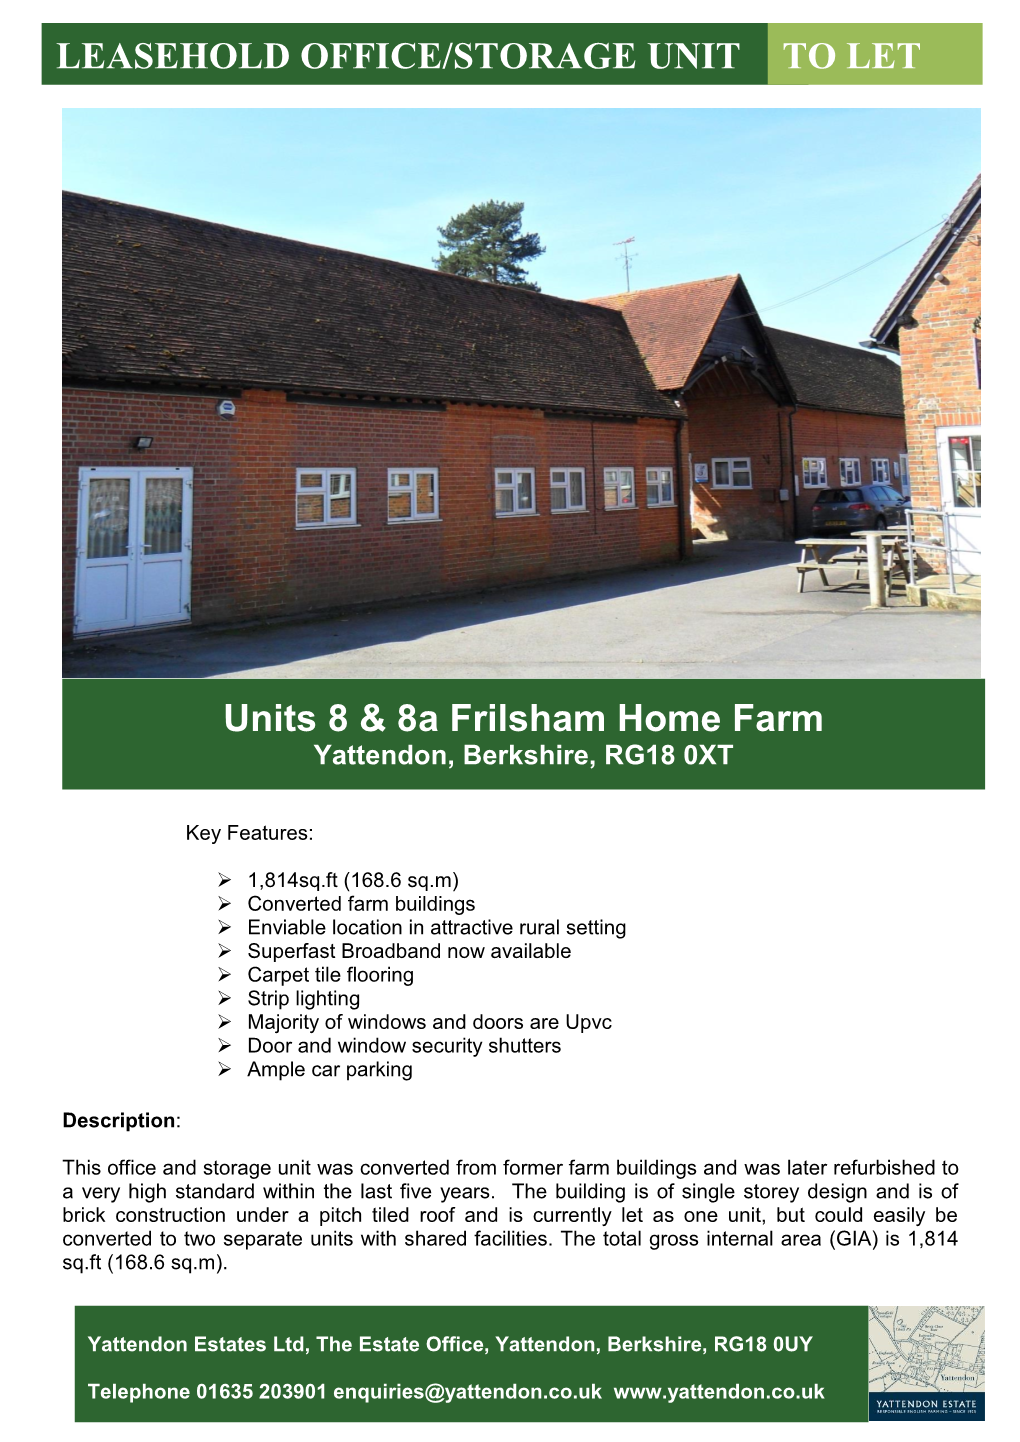 Leasehold Office/Storage Unit to Let